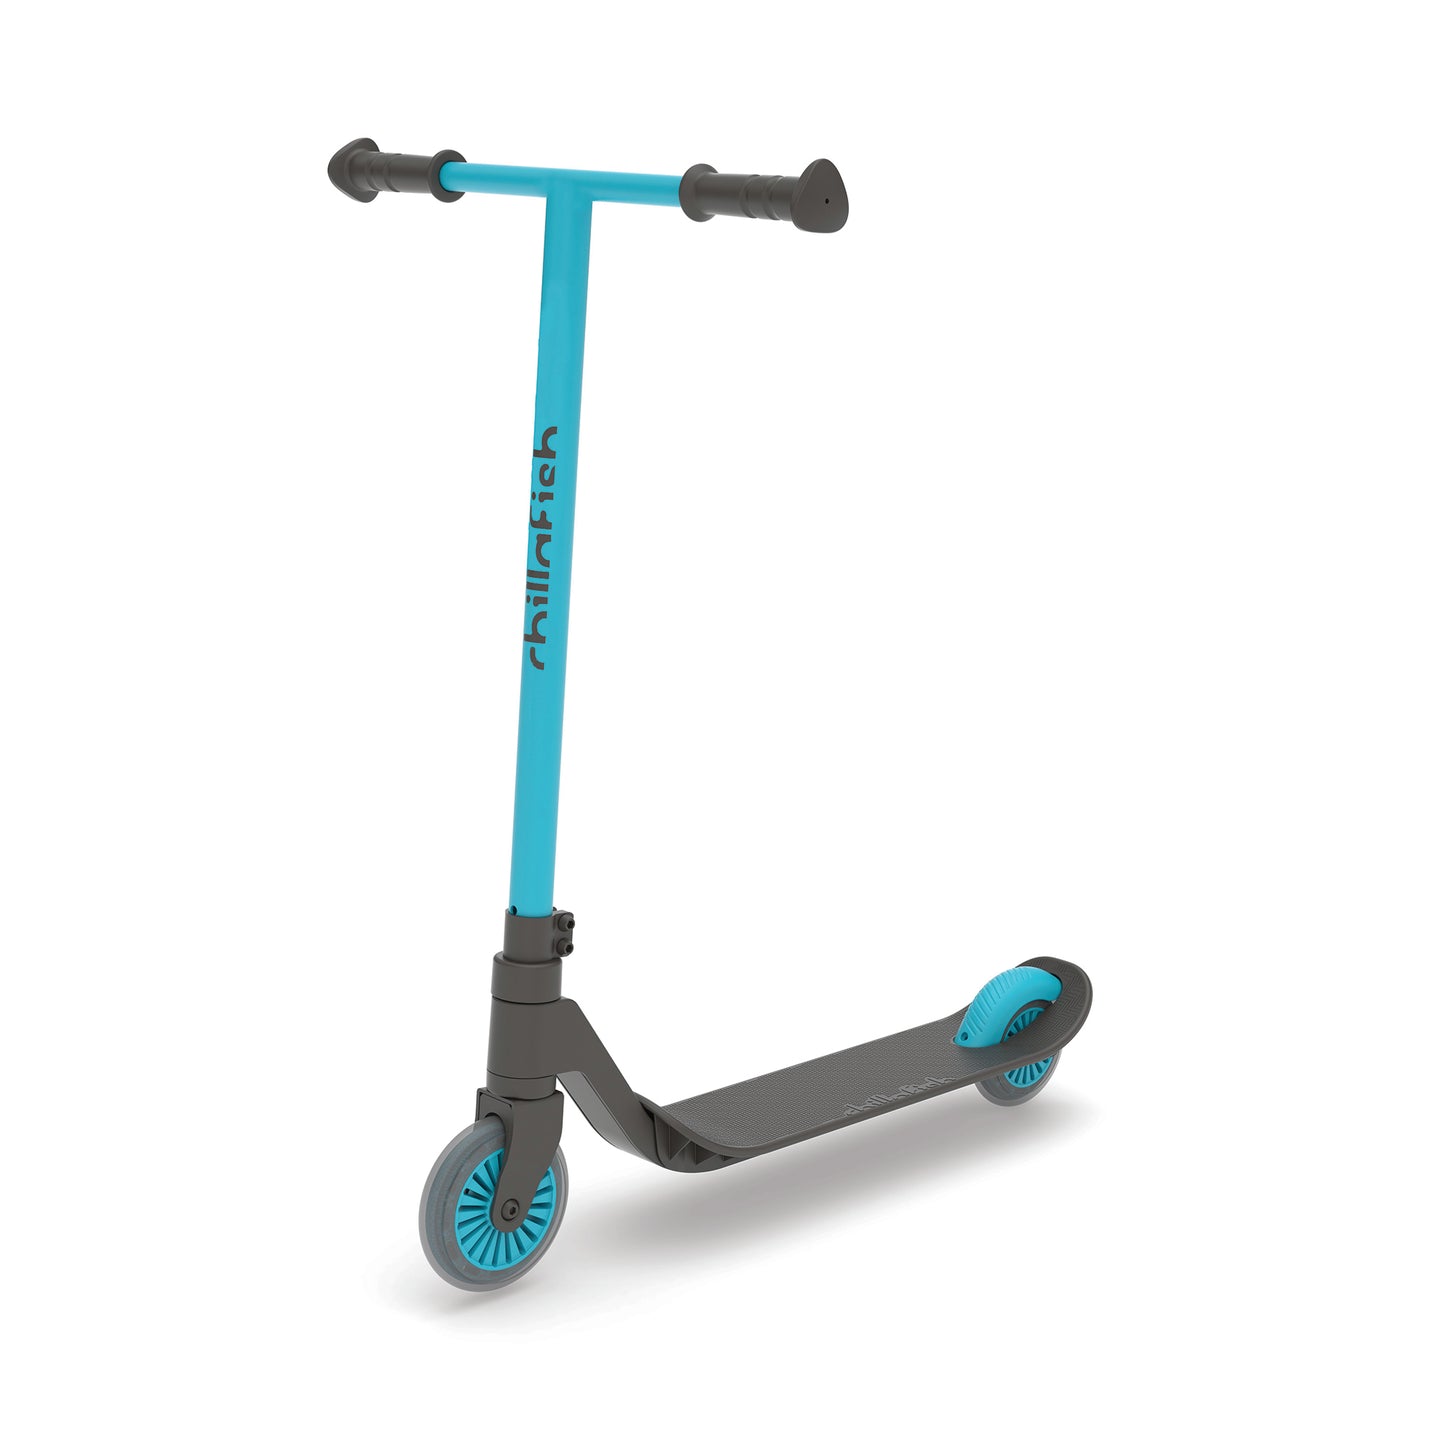 Stunti scooter with integrated brake